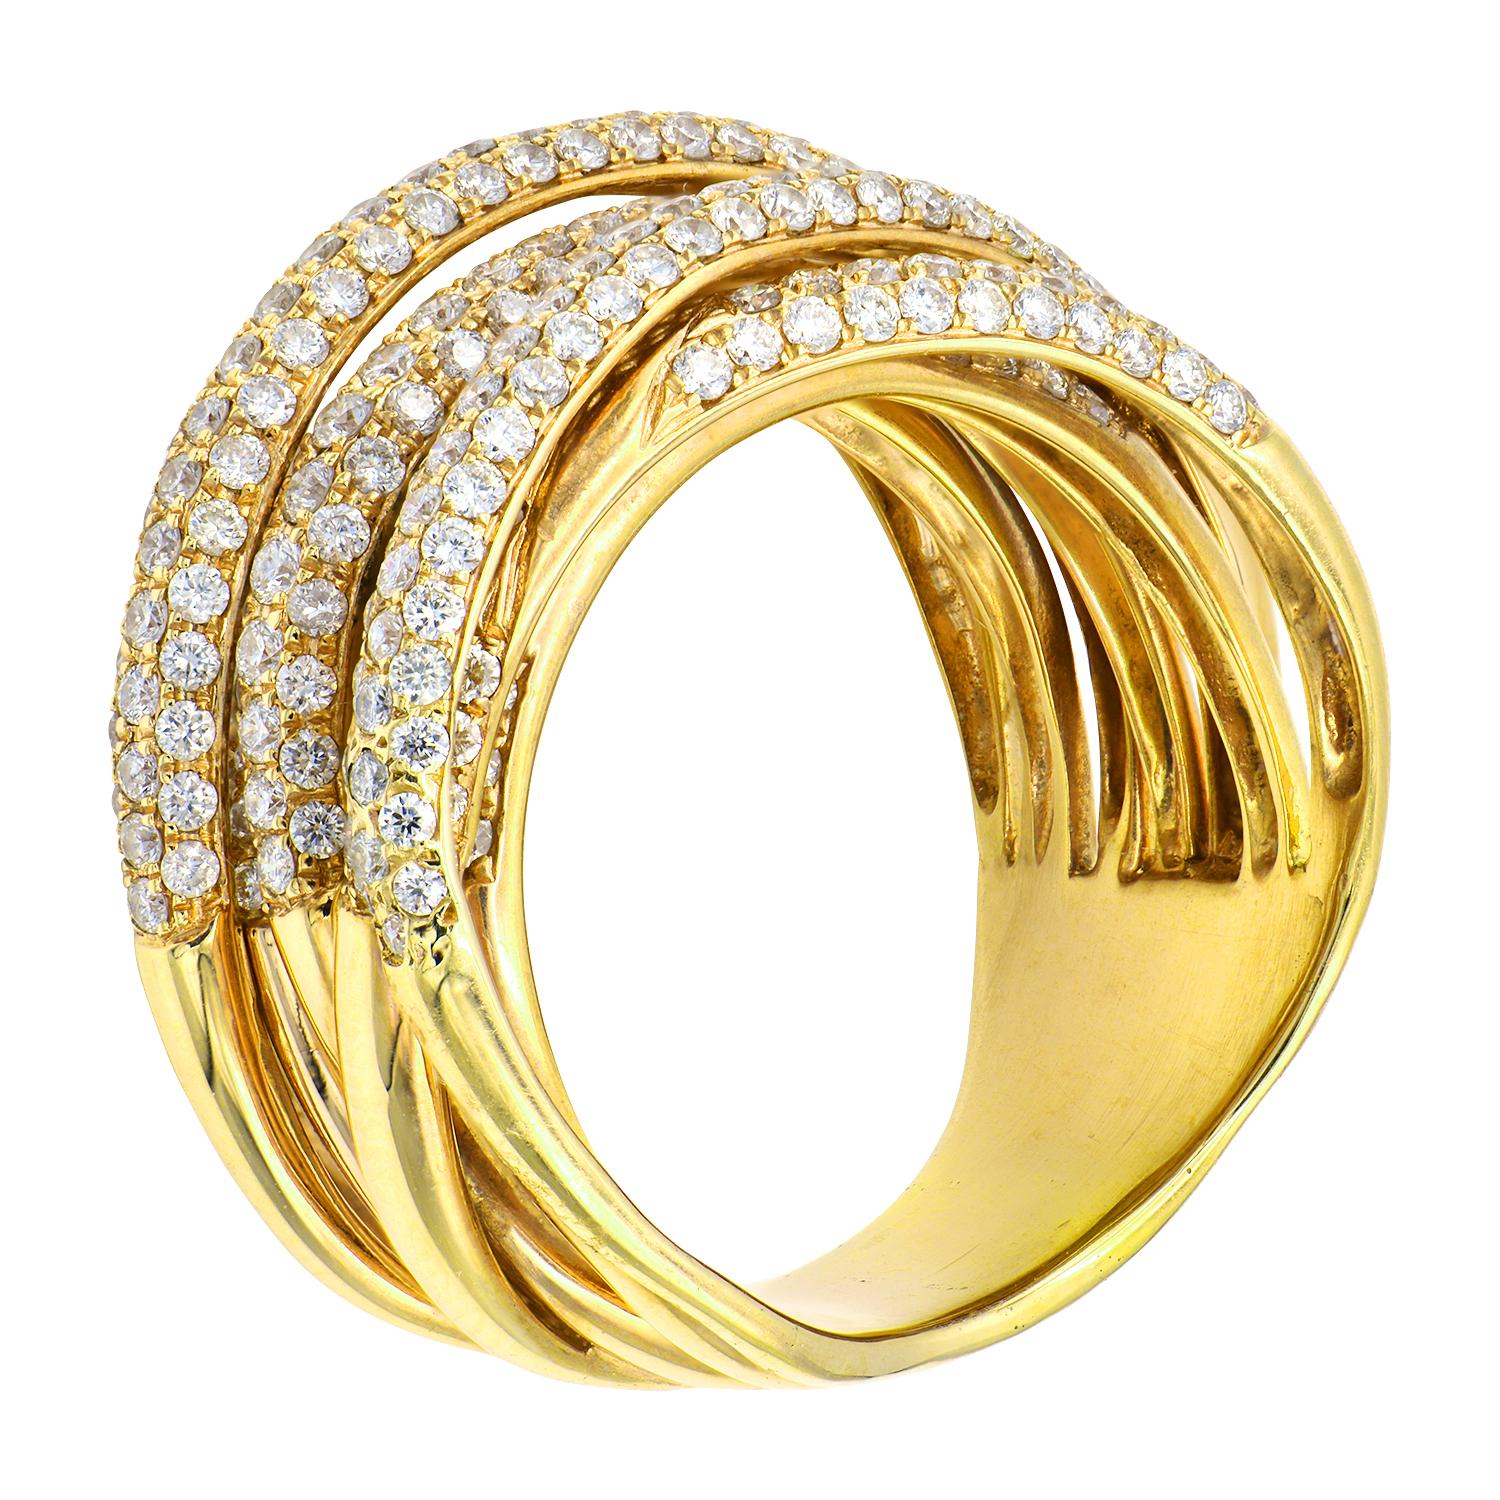 This gorgeous fashion crossover ring definitely makes a statement. This ring is made of 322 round VS21, G color diamonds totaling 2.32 carats. The diamonds are set beautifully in 12.3 grams of 18 karat yellow gold. This ring is special for its